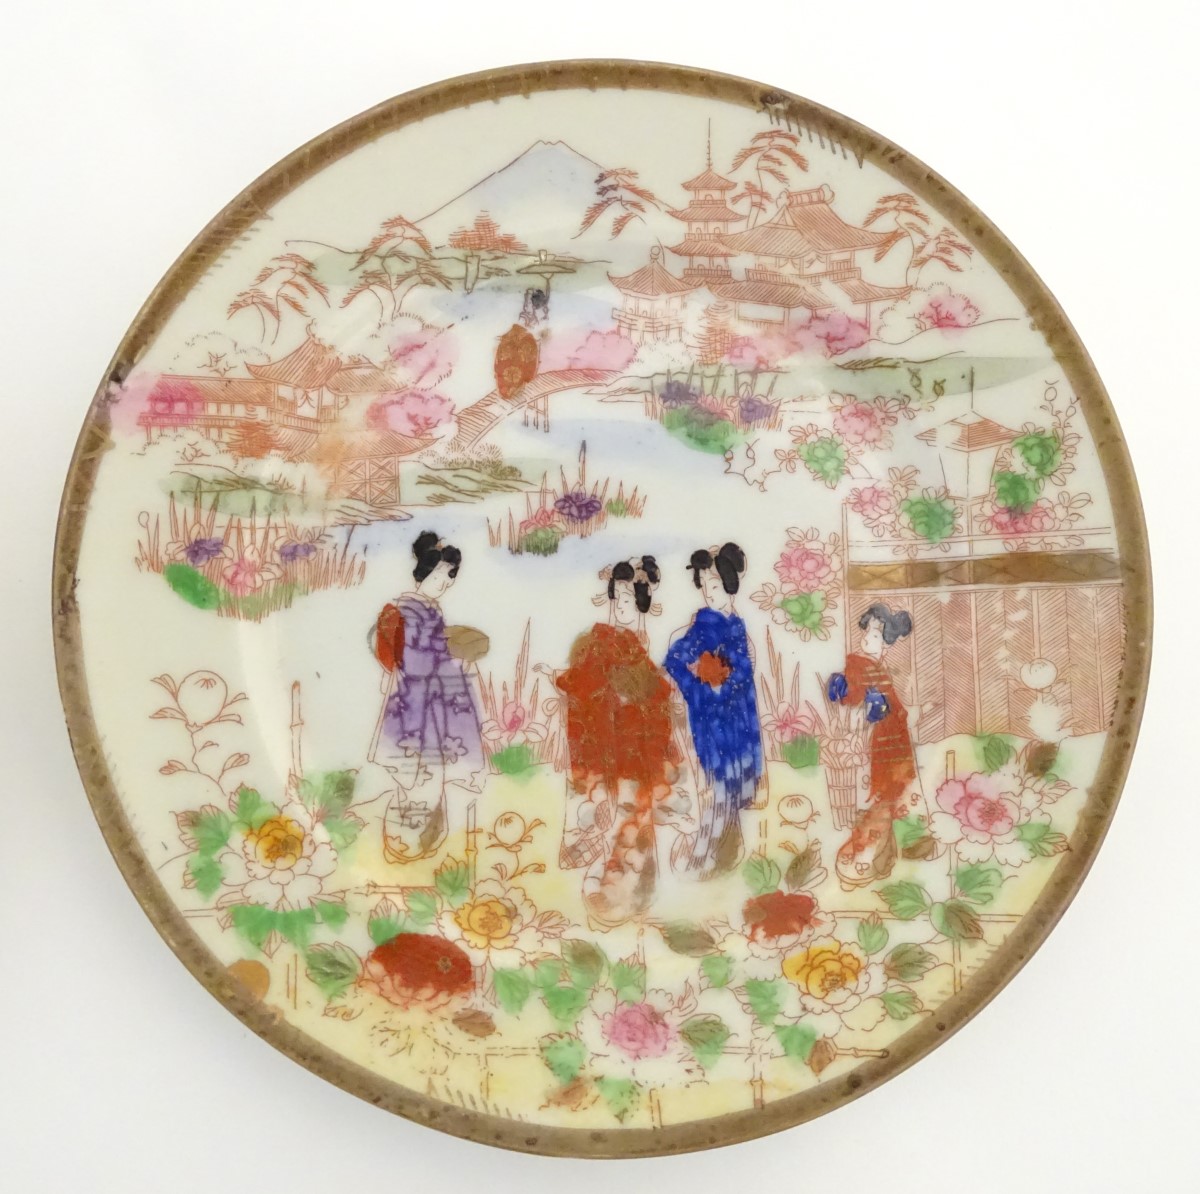 Six Japanese plates depicting figures in traditional dress in an Oriental landscape depicting Mount - Image 8 of 8